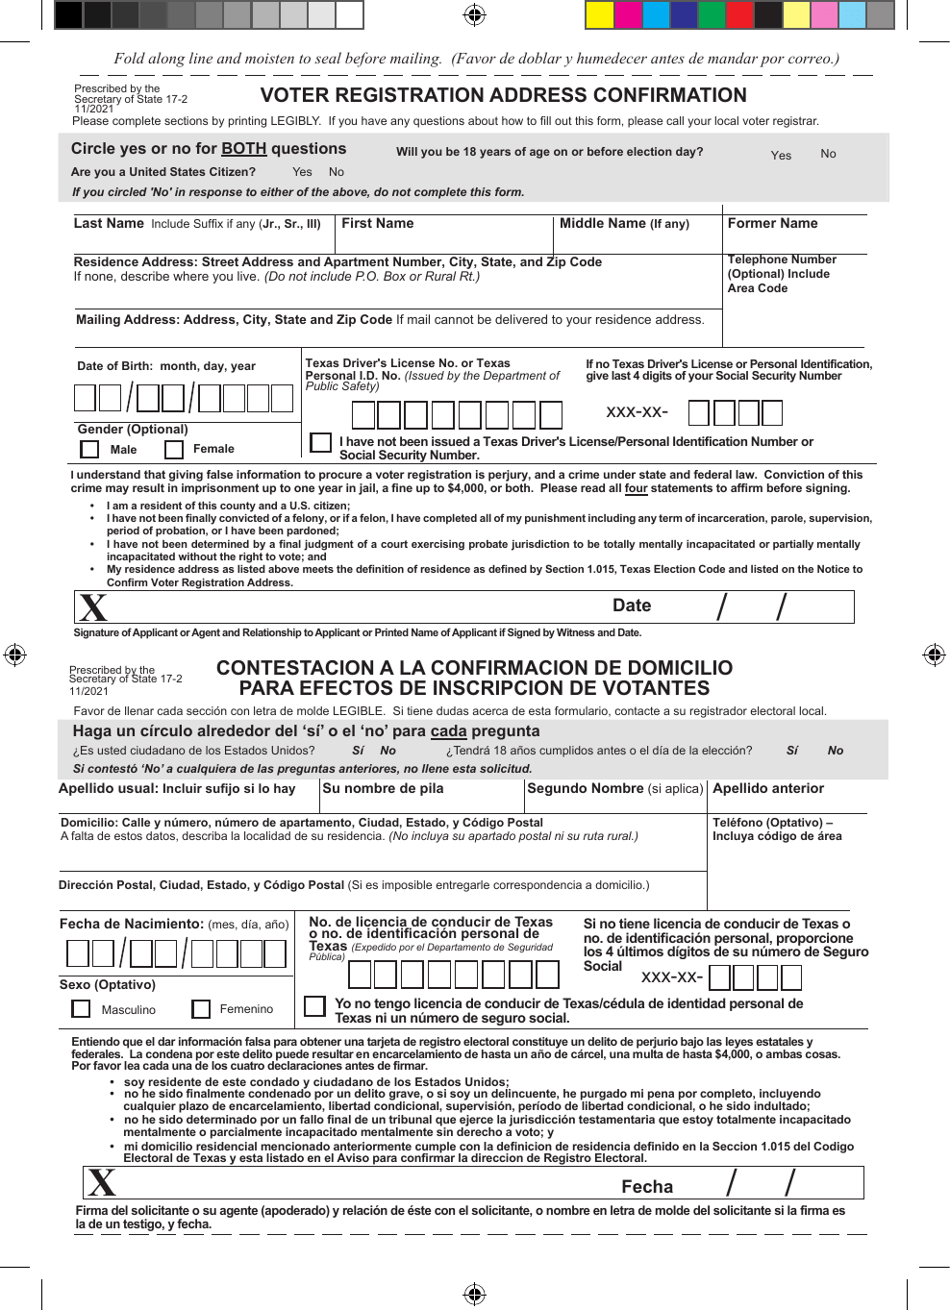 Form 17-2 Voter Registration Address Confirmation - Fold Over - Texas (English/Spanish), Page 1